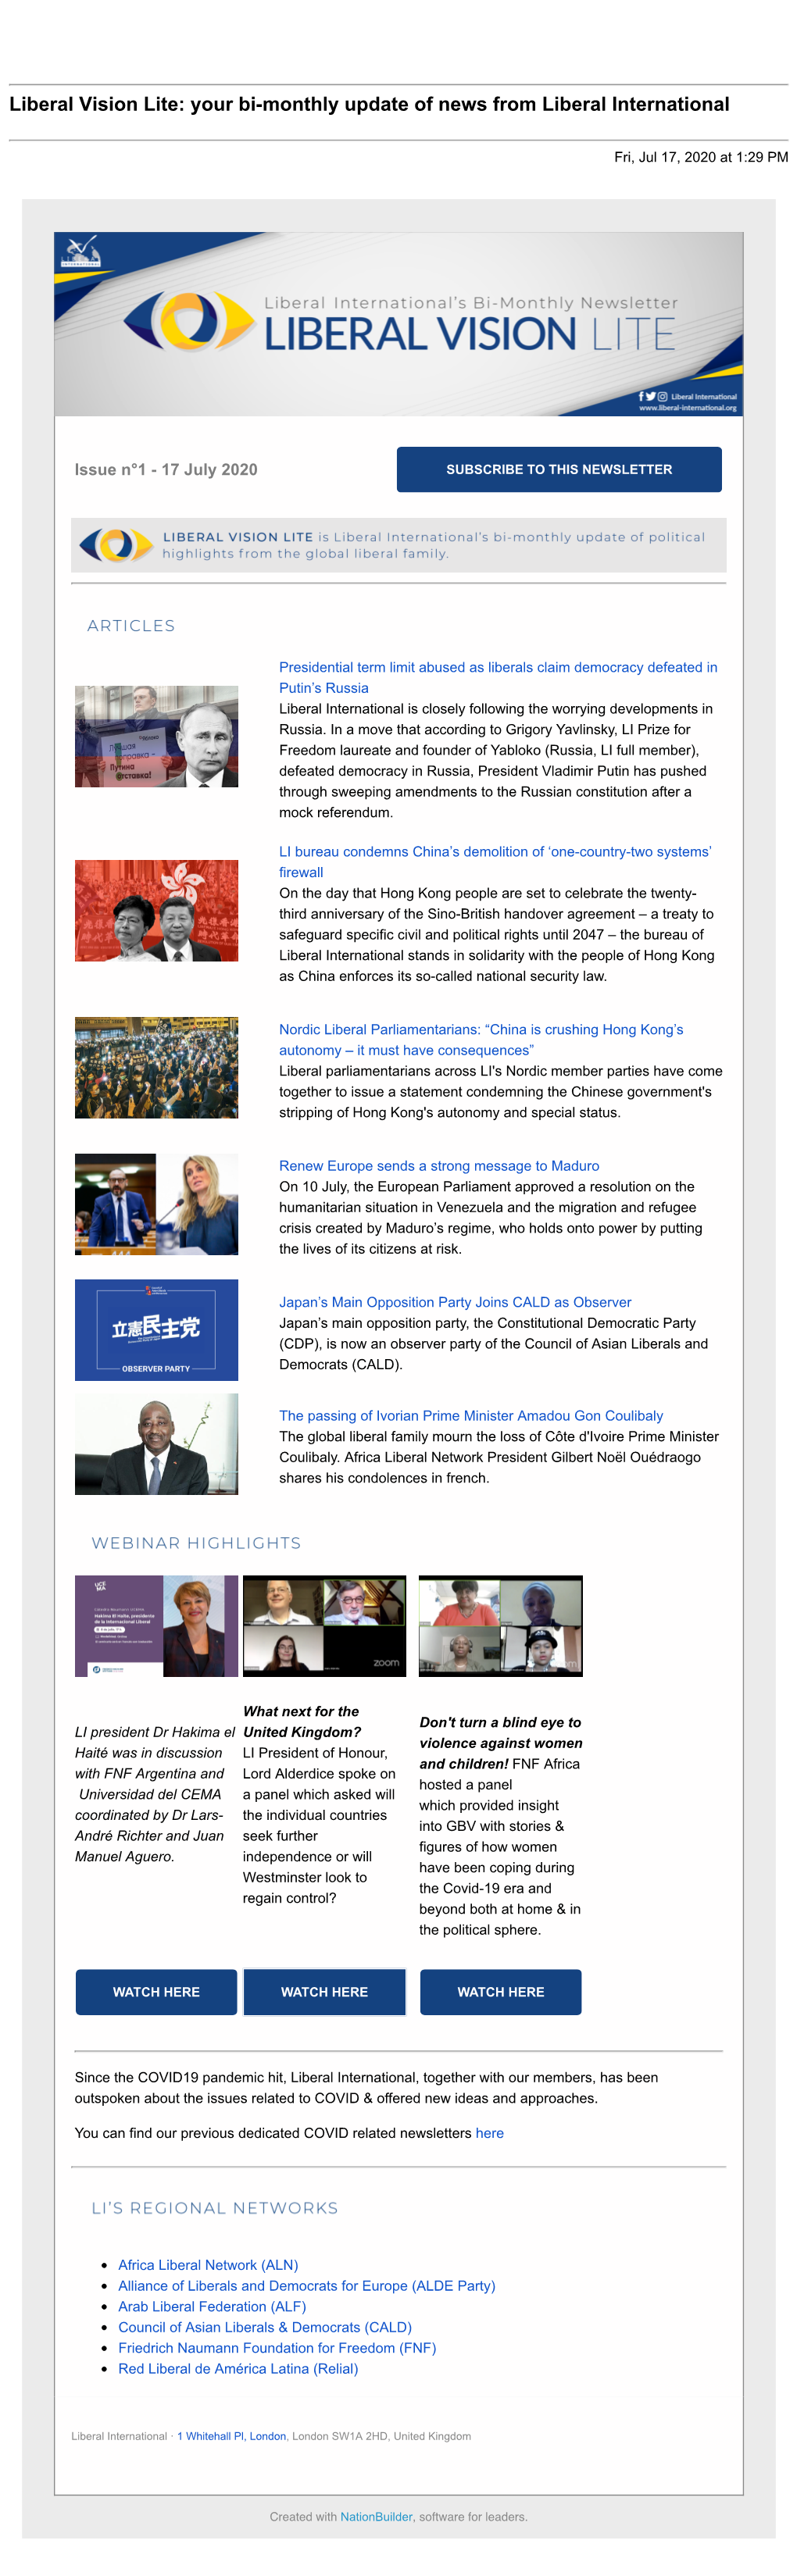 Liberal Vision Lite: Your Bi-Monthly Update of News from Liberal International